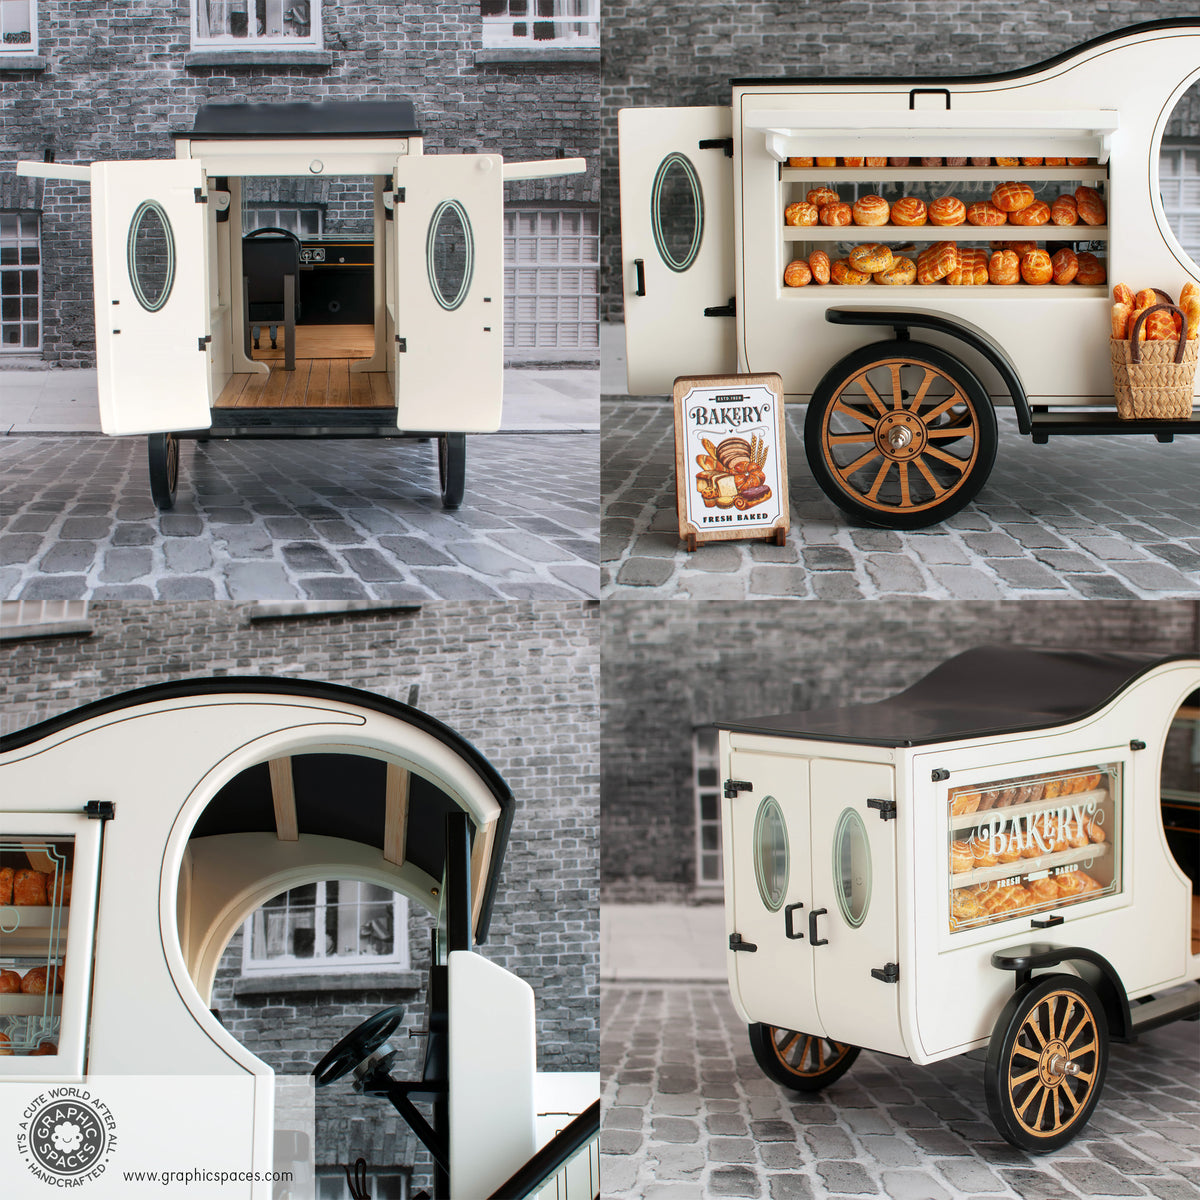 1:12 Scale Room Box White Bakery Shop Truck Model T C Cab. Various details of rear doors, side display and interior roof.